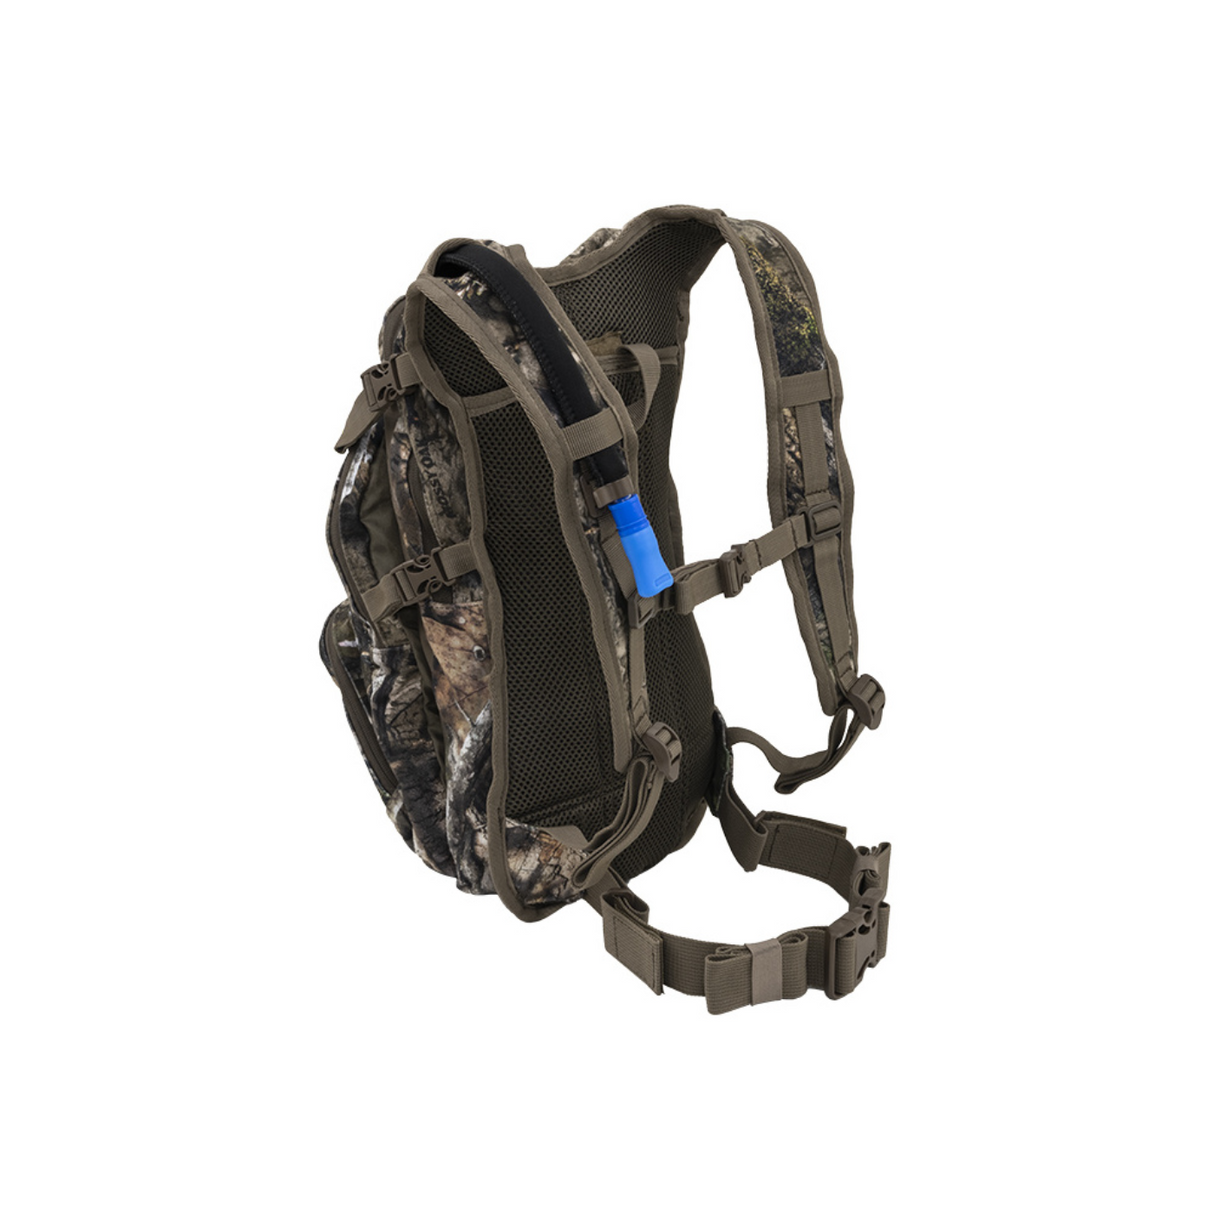 Willow Creek Hydration Pack